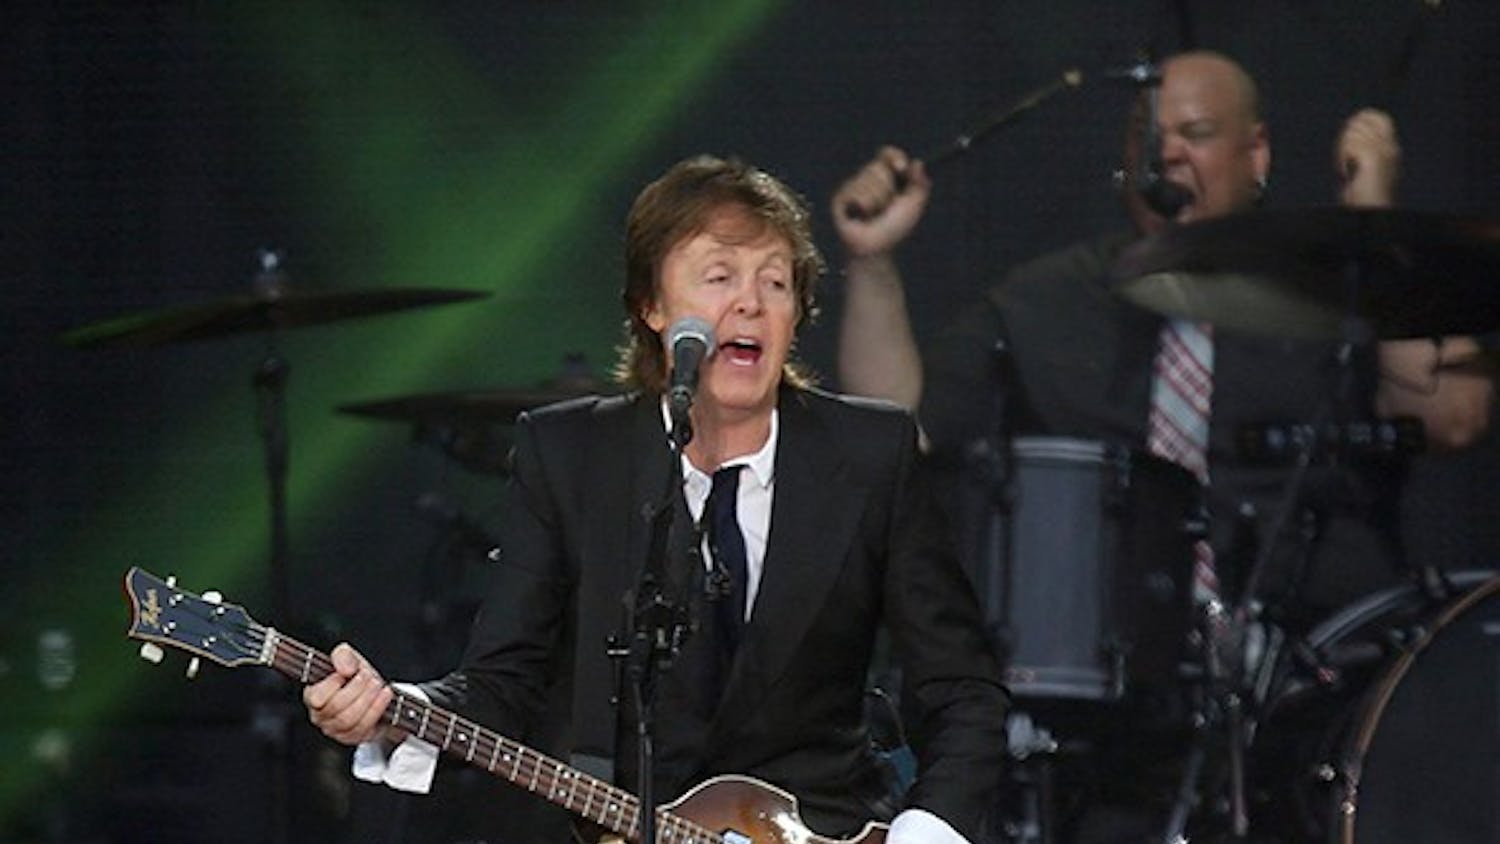 Paul McCartney headlines on the Land&apos;s End stage during the 6th annual Outside Lands Music and Arts Festival in Golden Gate Park in San Francisco, California, on Friday, August 9, 2013. The festival runs through Sunday and headliners include the Red Hot Chili Peppers and Nine Inch Nails. (Jane Tyska/Bay Area News Group/MCT)